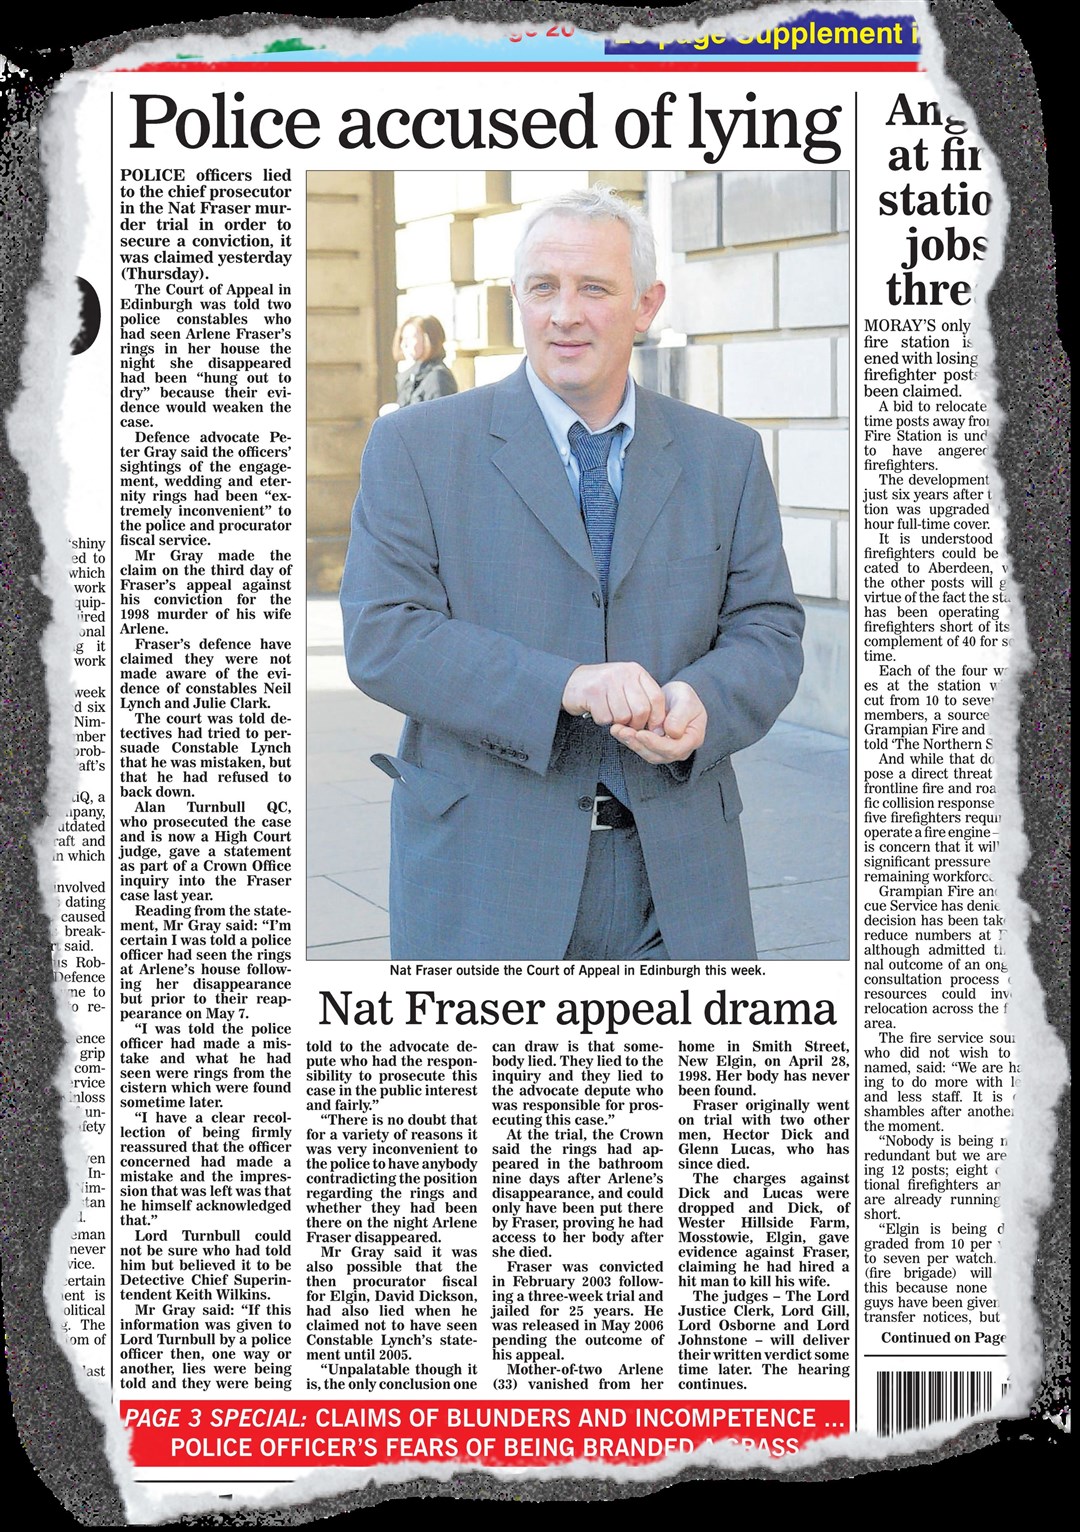 This story appeared in the Northern Scot, November 16, 2007...Picture: Northern Scot